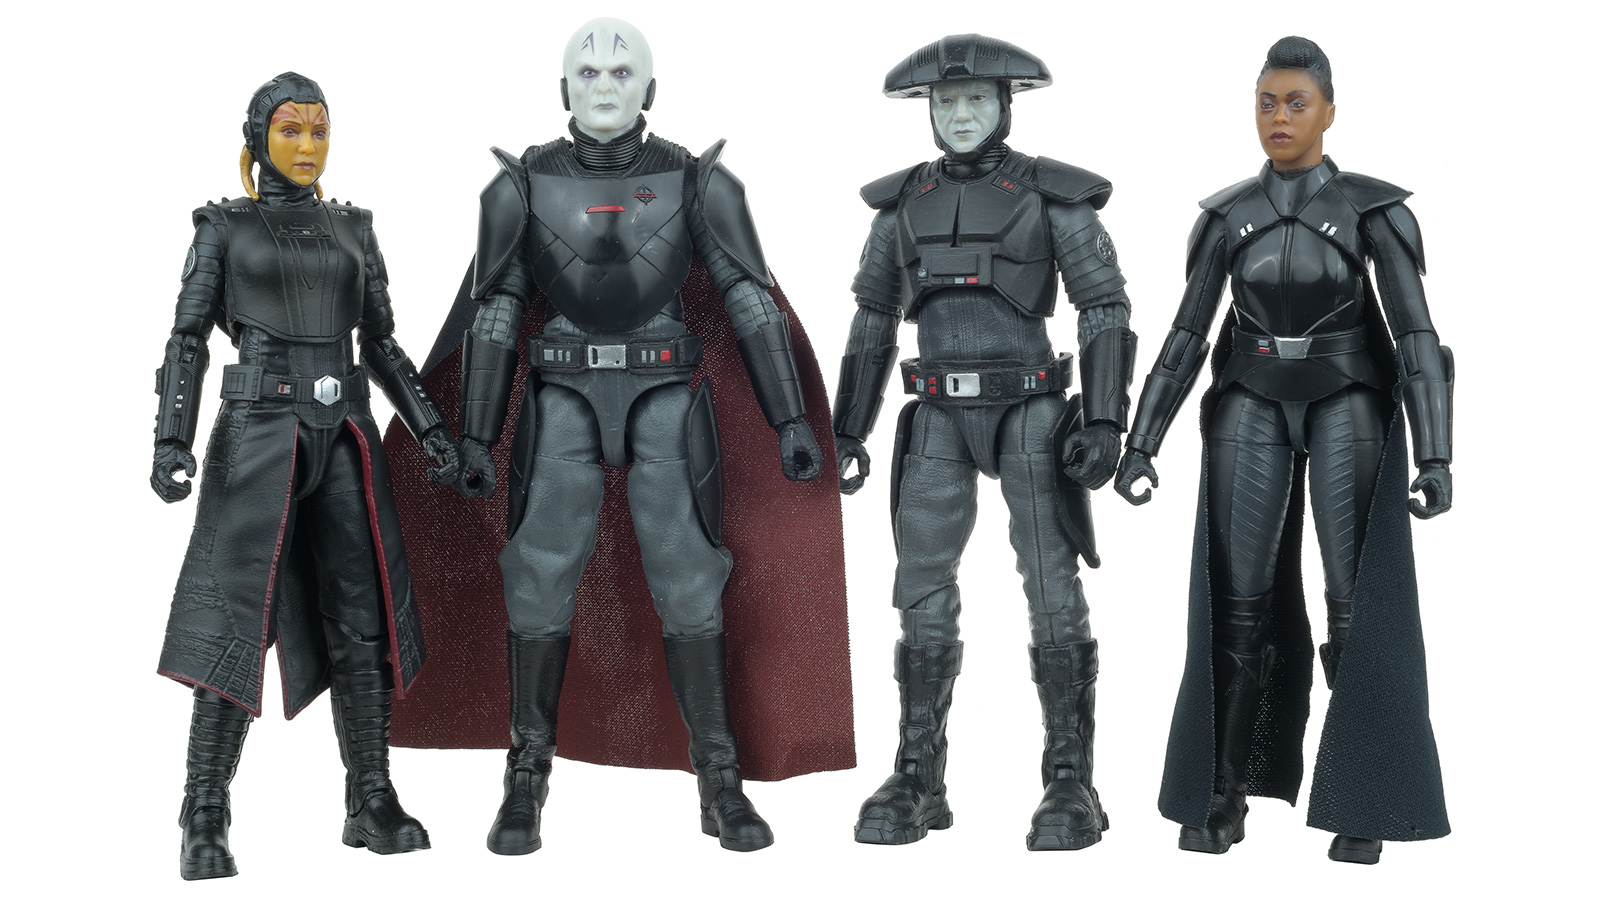 Over A Year Later…. The Black Series 6-Inch Inquisitor (Fourth Sister) Arrives